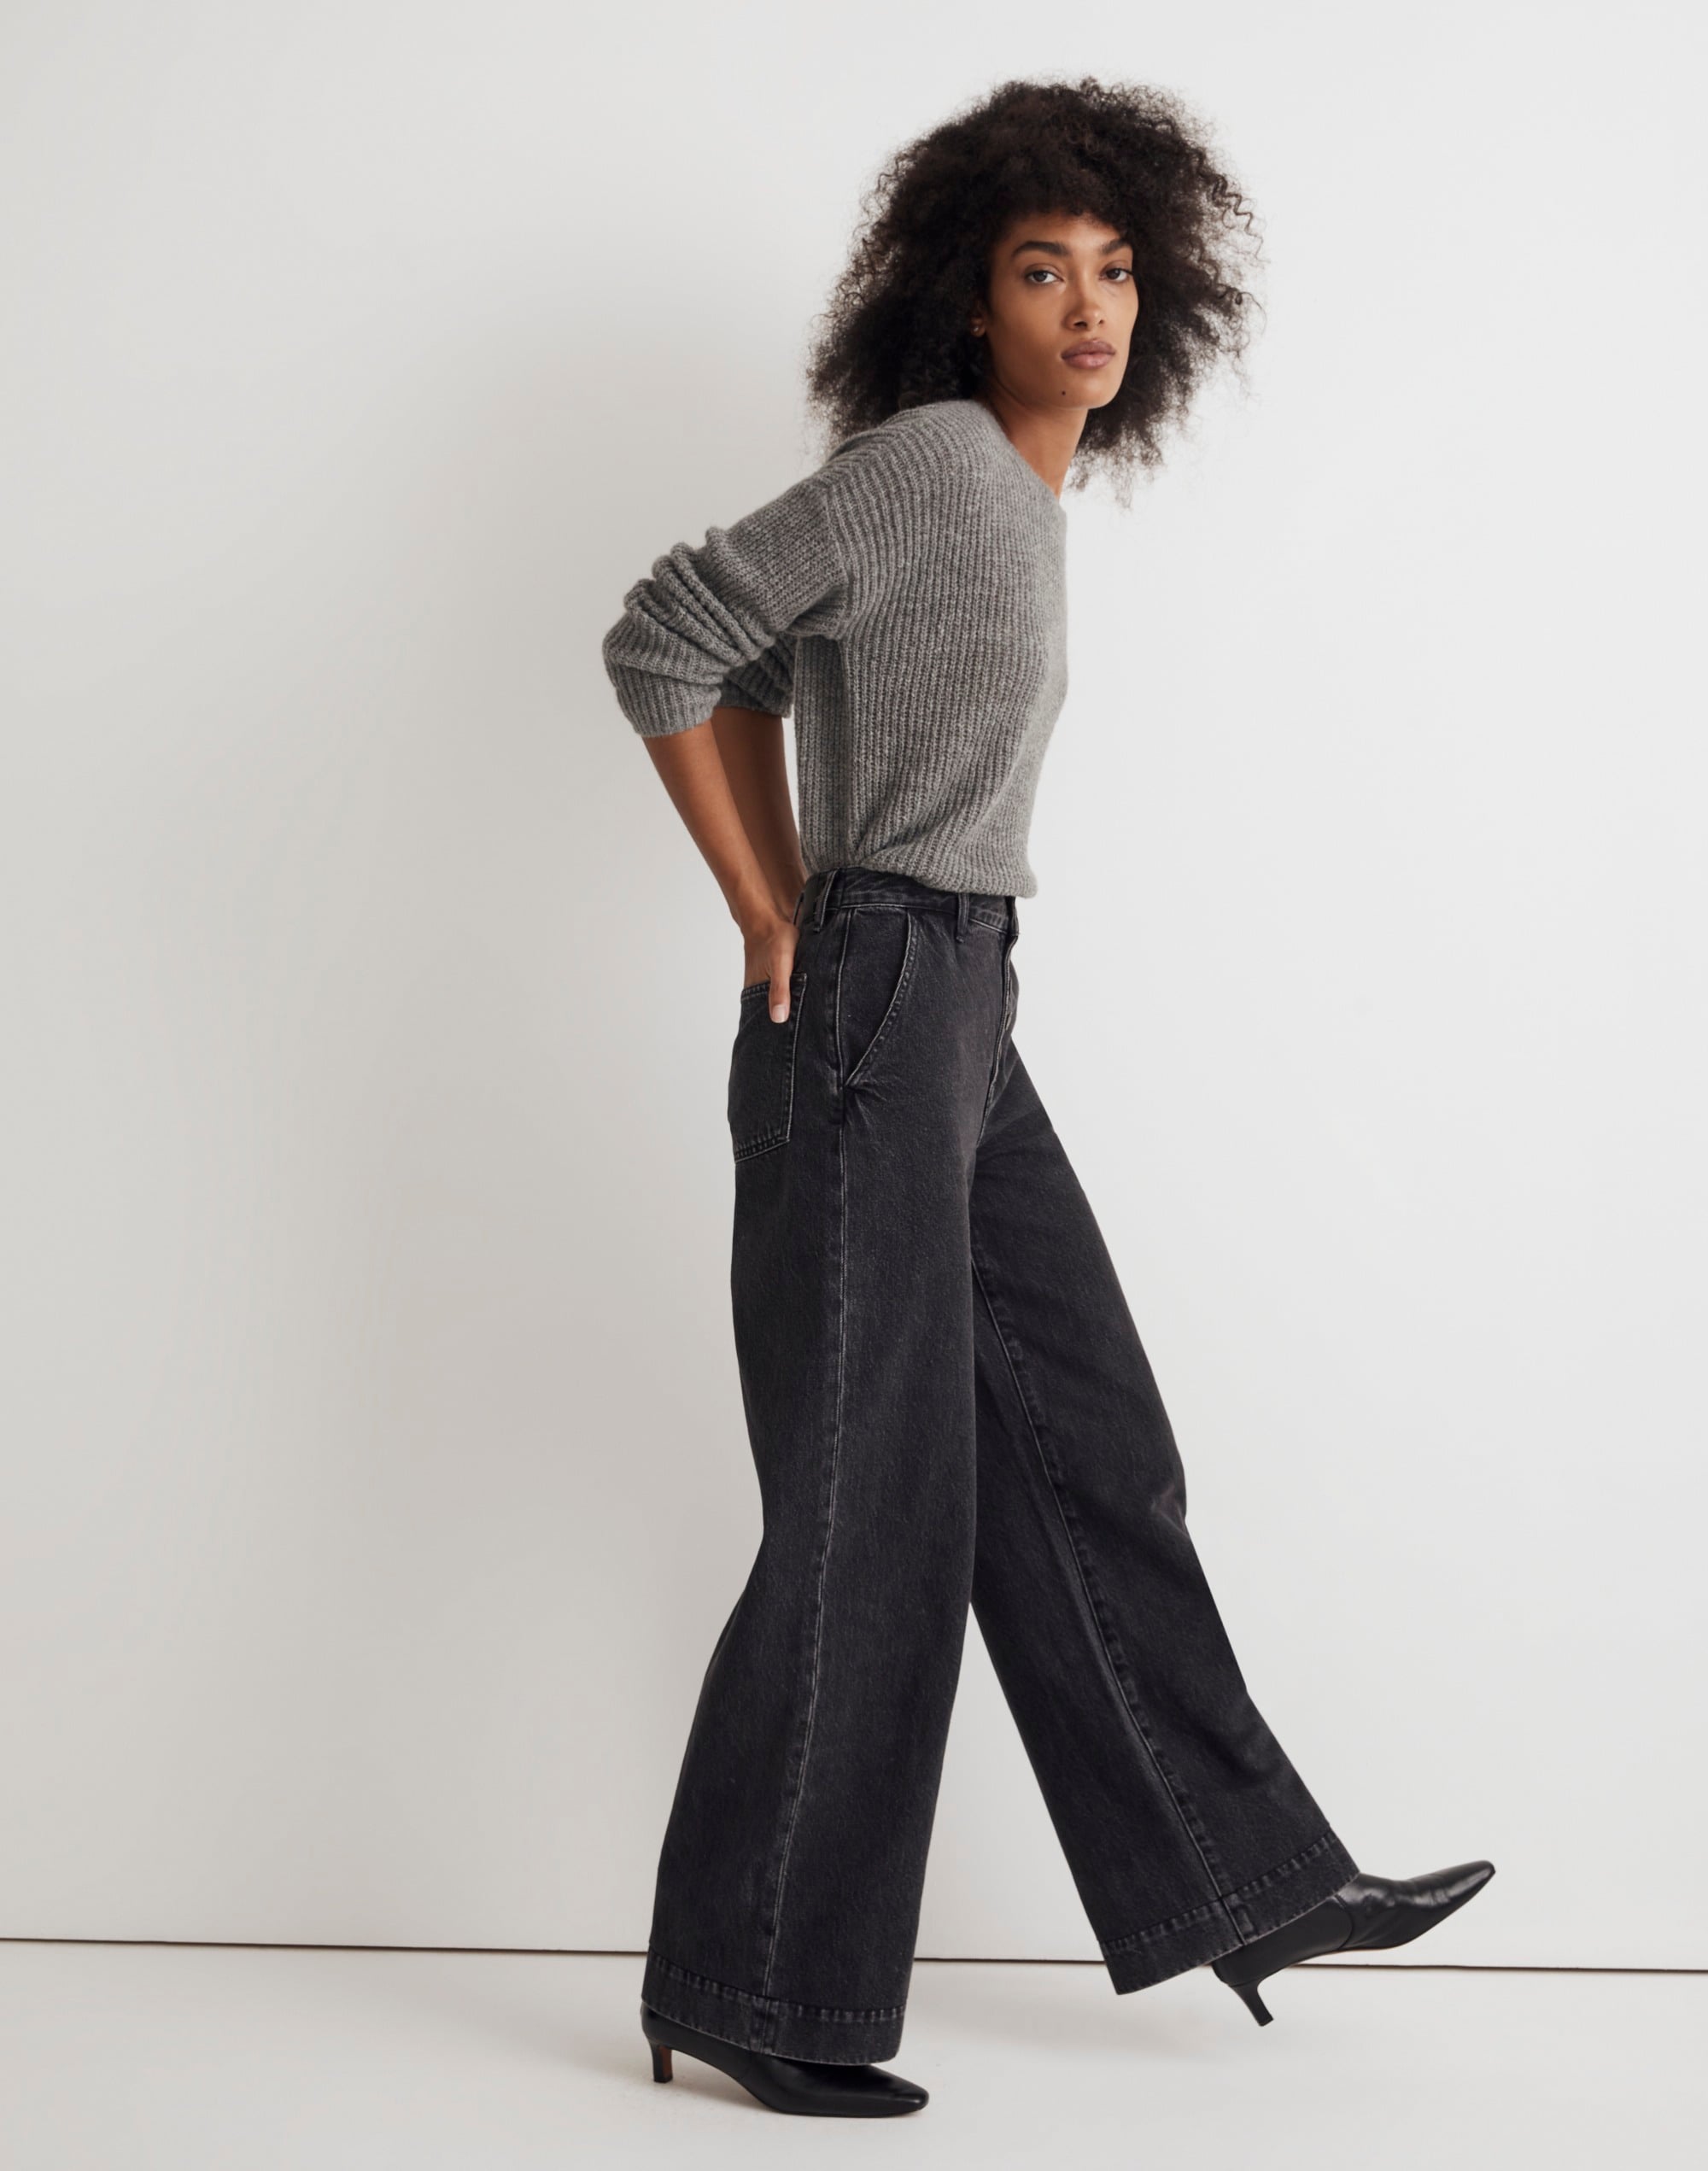 Superwide-Leg Jeans in Selwick Wash: Button-Front Edition